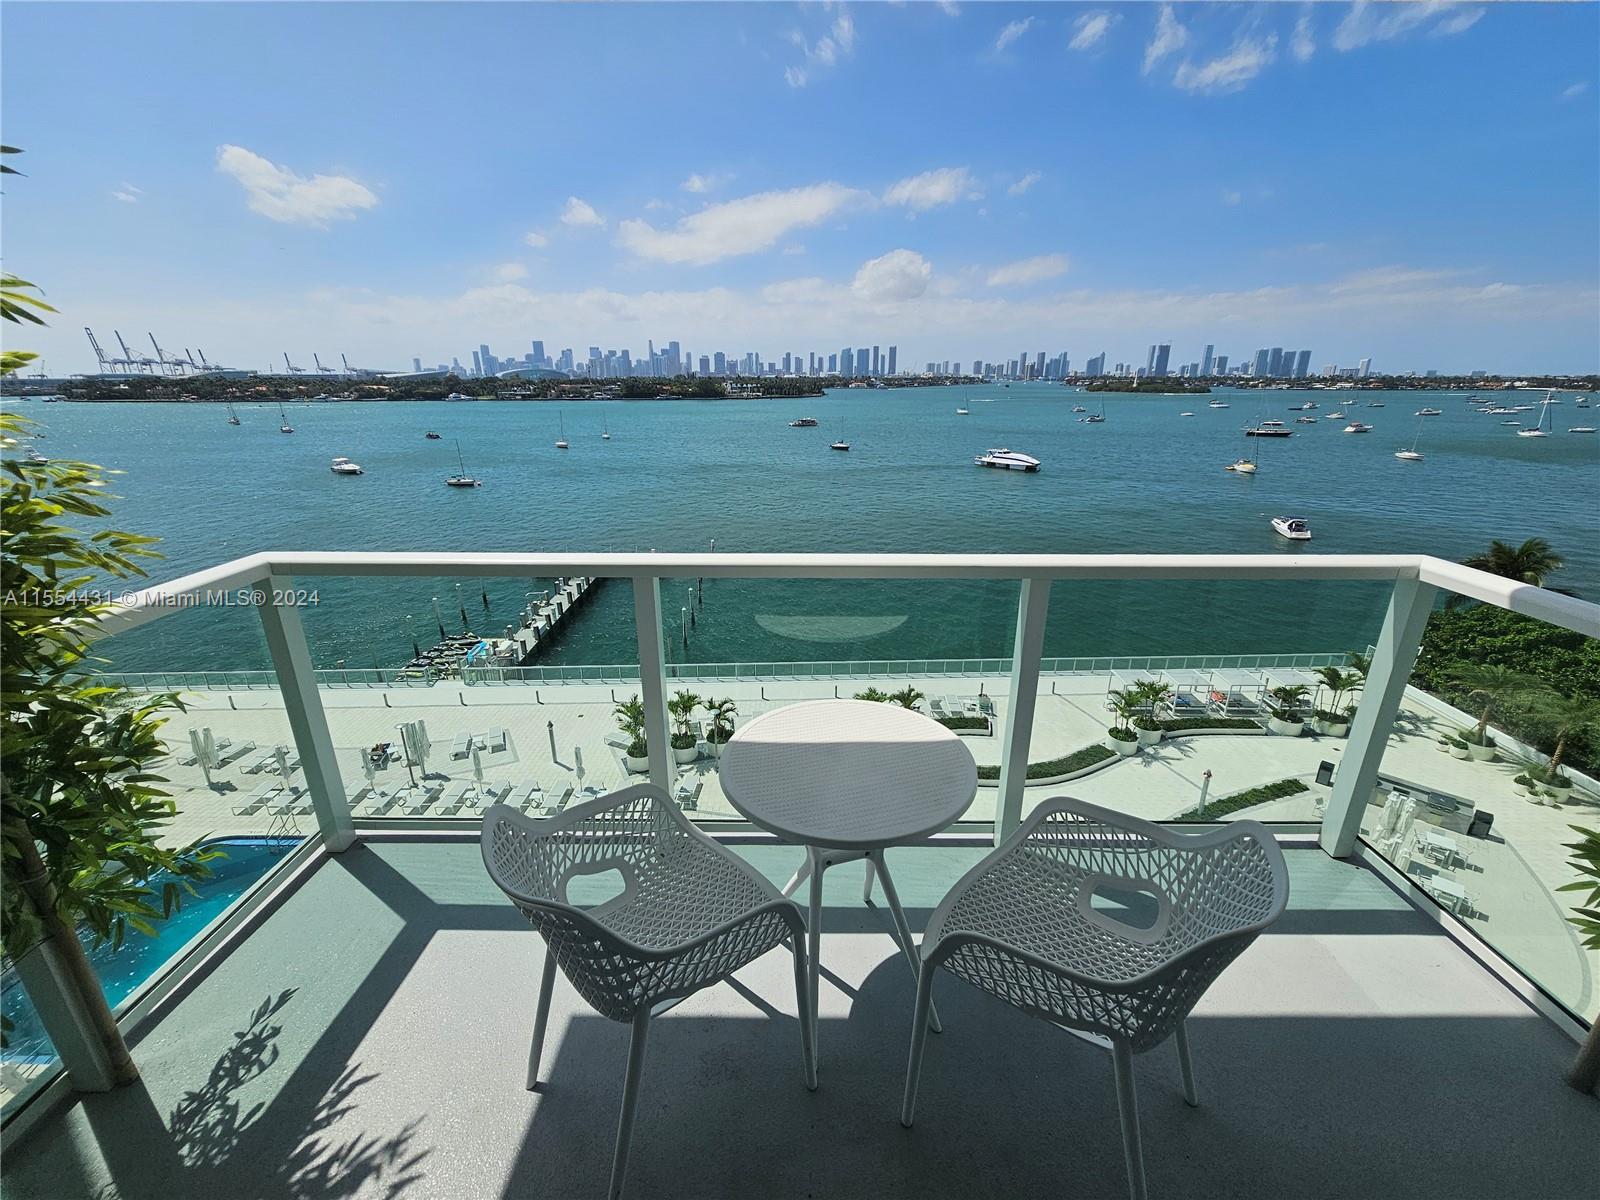 The most spectacular views in South Beach. This 1 bed, 1 bath updated unit is available immediately for annual lease. Open kitchen with counter seating, quartz countertops, Stainless appliances and recessed lighting. Spectacular bay views even from the kitchen! Modern white porcelain floors throughout. Completely renovated bath with walk in shower. Large walk-in closet in primary bedroom. Lease payment includes full cable tv & high speed internet. Resident Laundry is located just outside the unit. The building has just completed a multi million dollar renovation with one of the best bayfront pool and spa decks in South Beach, complete with a full outdoor kitchen for use by residents. Valet parking is available for a monthly fee of $85. Annual leases only!